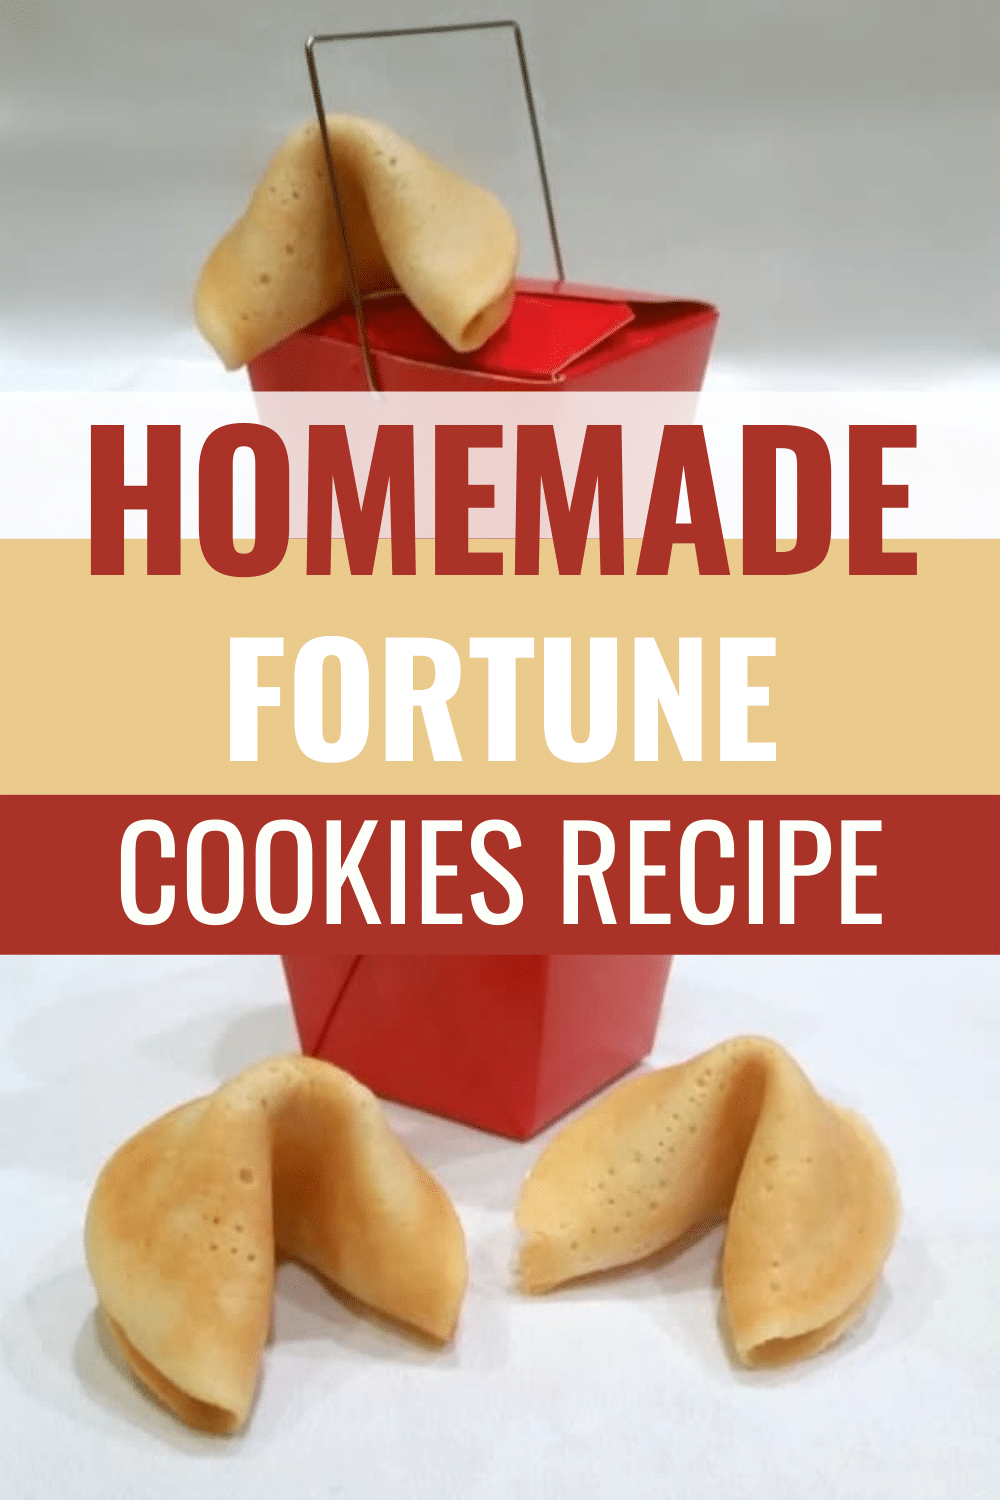 If you want to make fortune cookies, but don't have all day, here's a faster way to make homemade fortune cookies than baking one or two at a time. #fortunecookies #homemadefortunecookies #recipe via @wondermomwannab